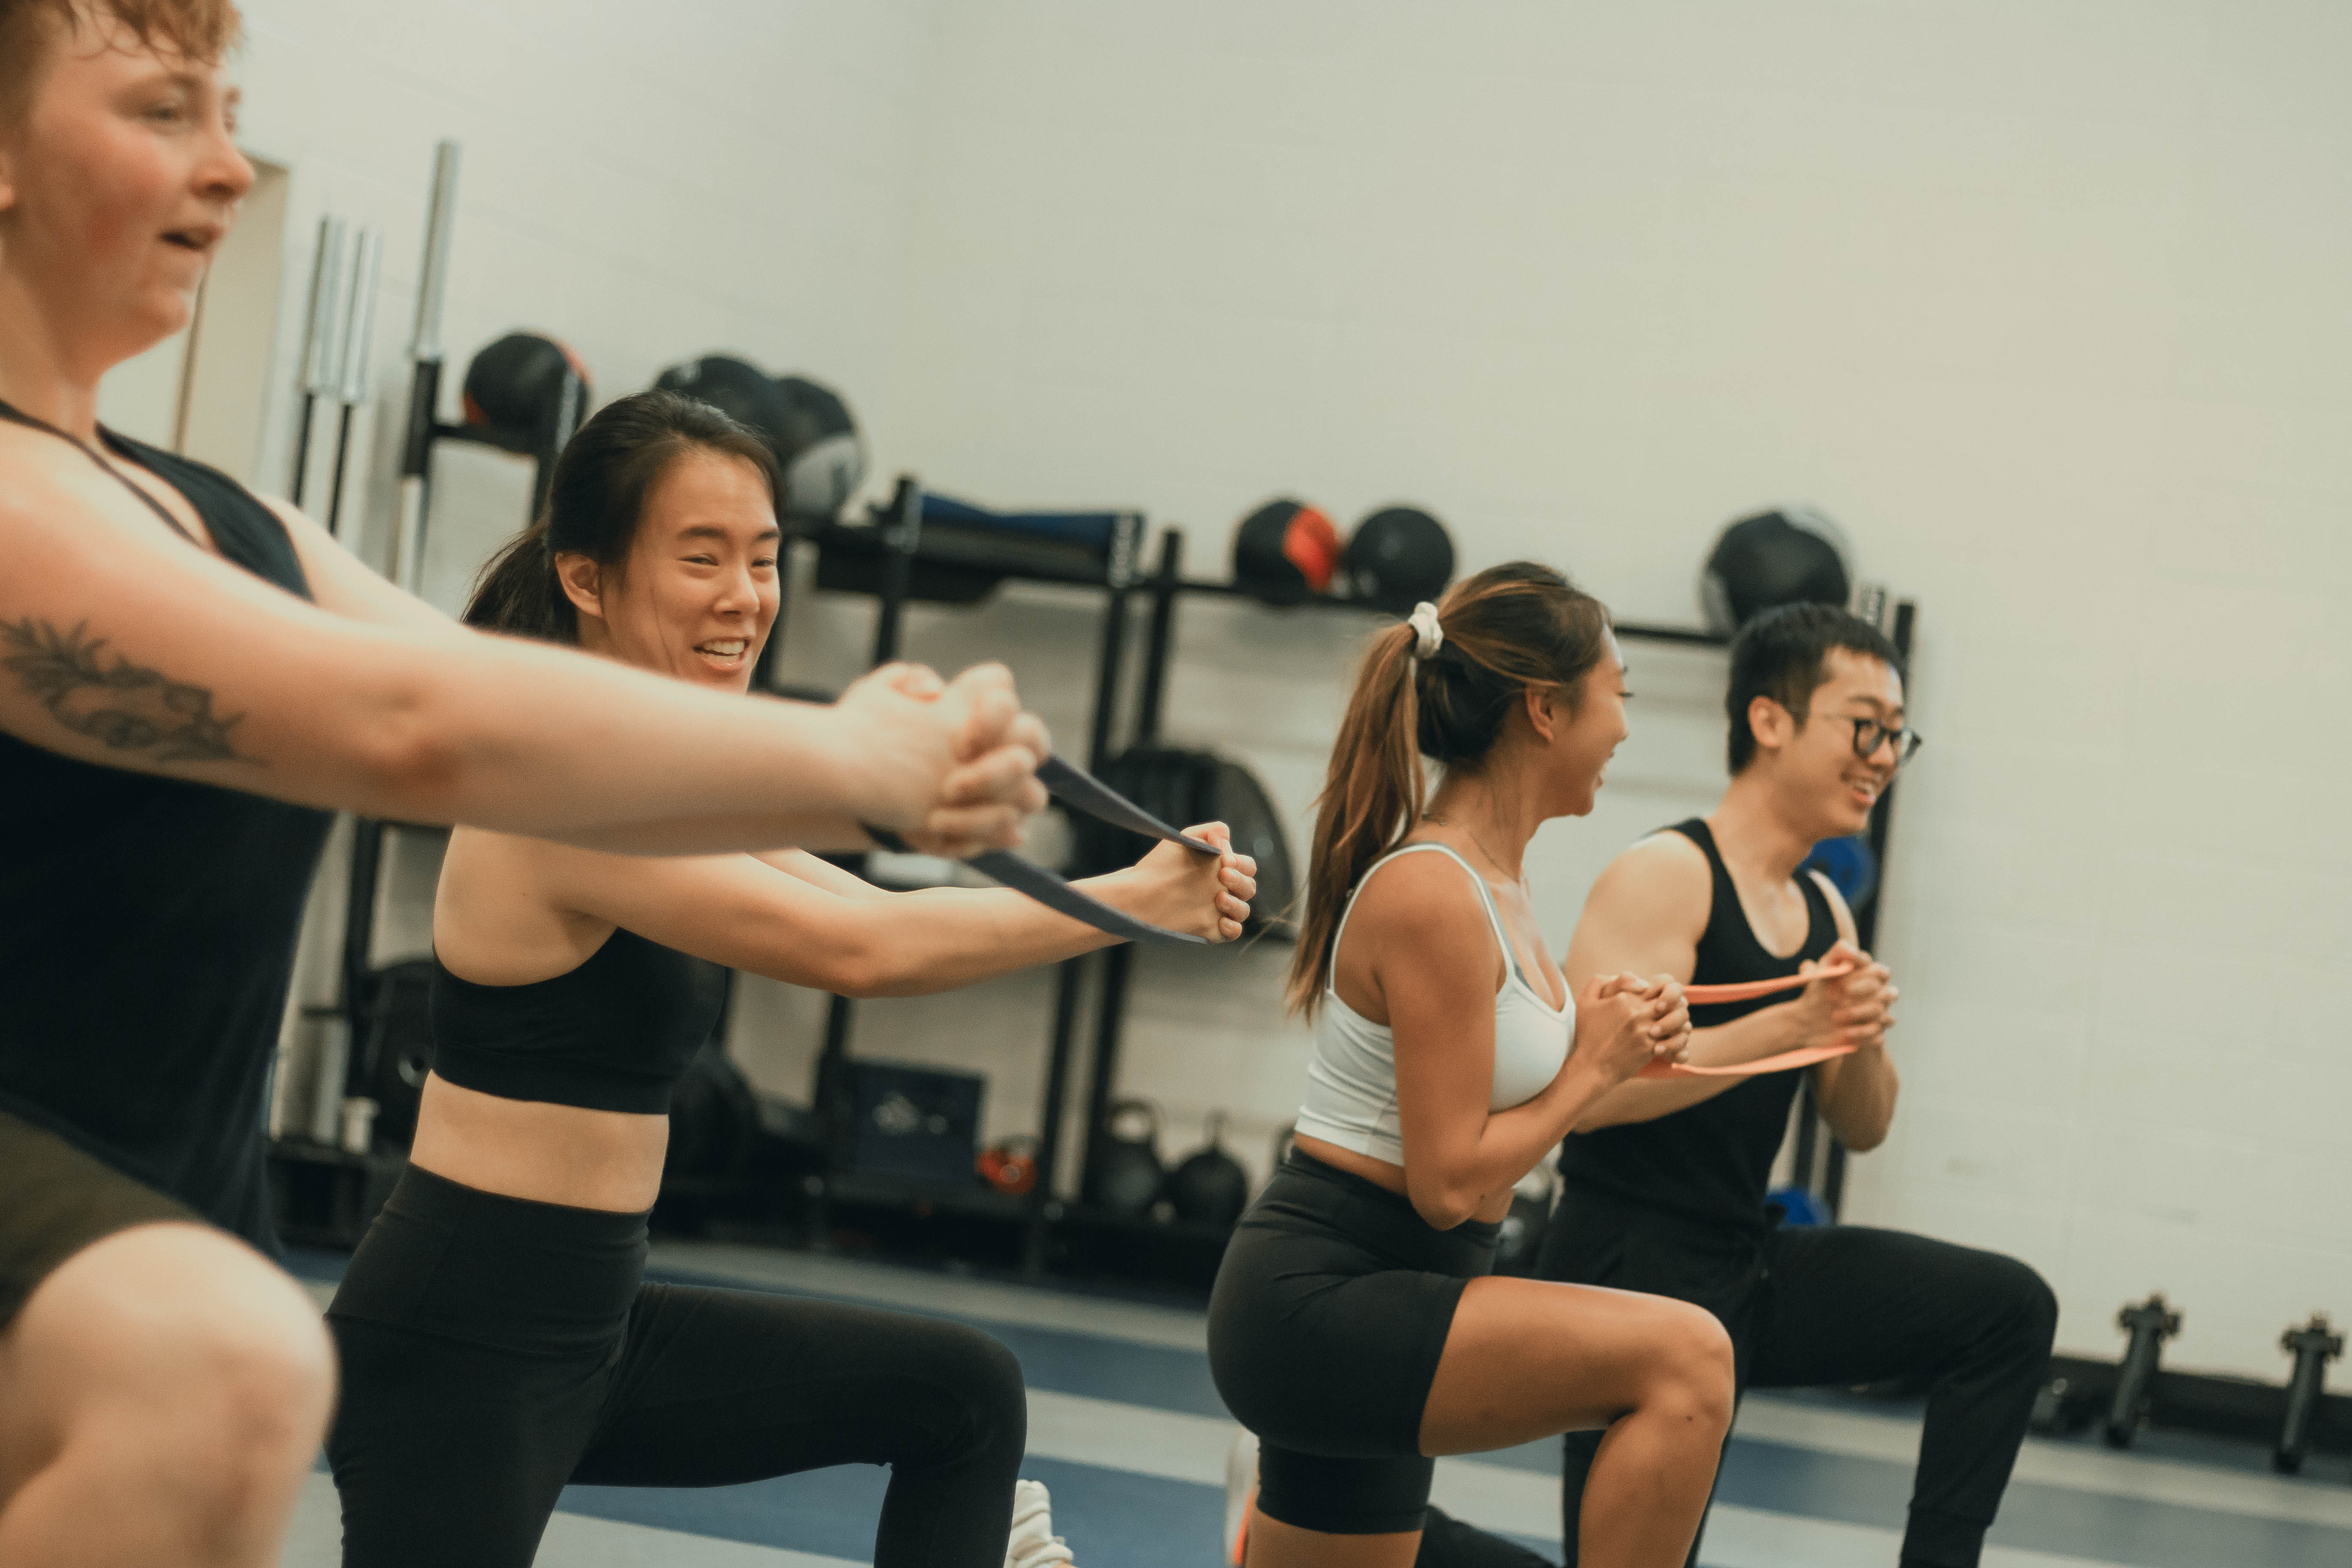 Group of students in a kneeling lunge positioning smiling while working out